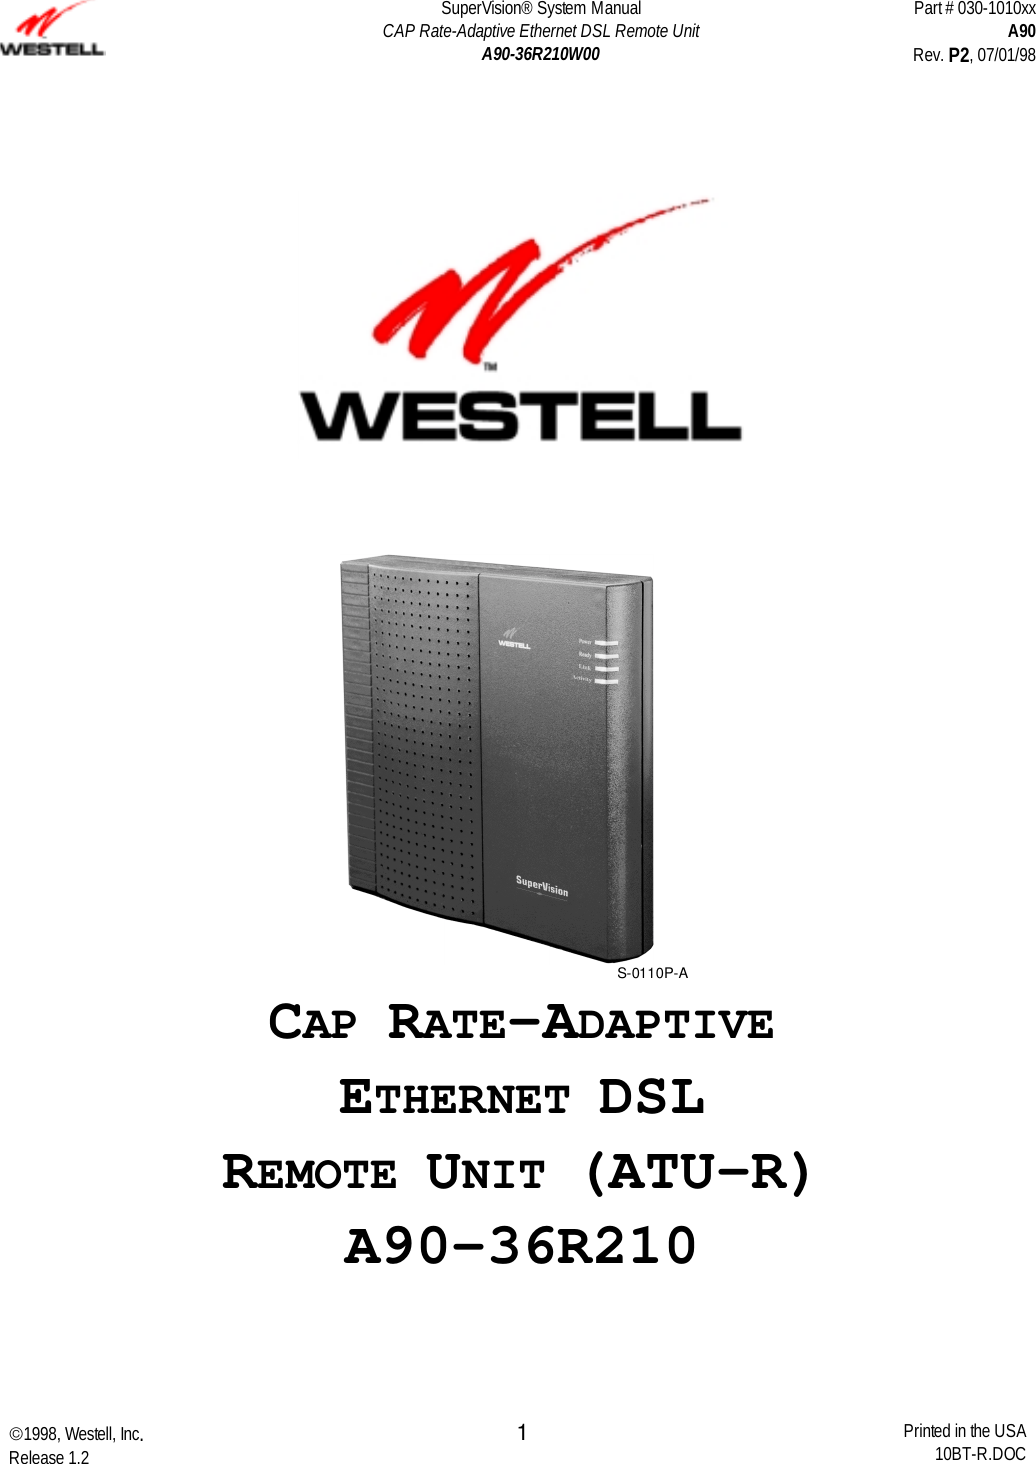 SuperVision® System ManualCAP Rate-Adaptive Ethernet DSL Remote UnitA90-36R210W00Part # 030-1010xxA90Rev. P2, 07/01/981998, Westell, Inc.Release 1.2 Printed in the USA10BT-R.DOC1S-0110P-ACAP RATE-ADAPTIVEETHERNET DSLREMOTE UNIT (ATU-R)A90-36R210